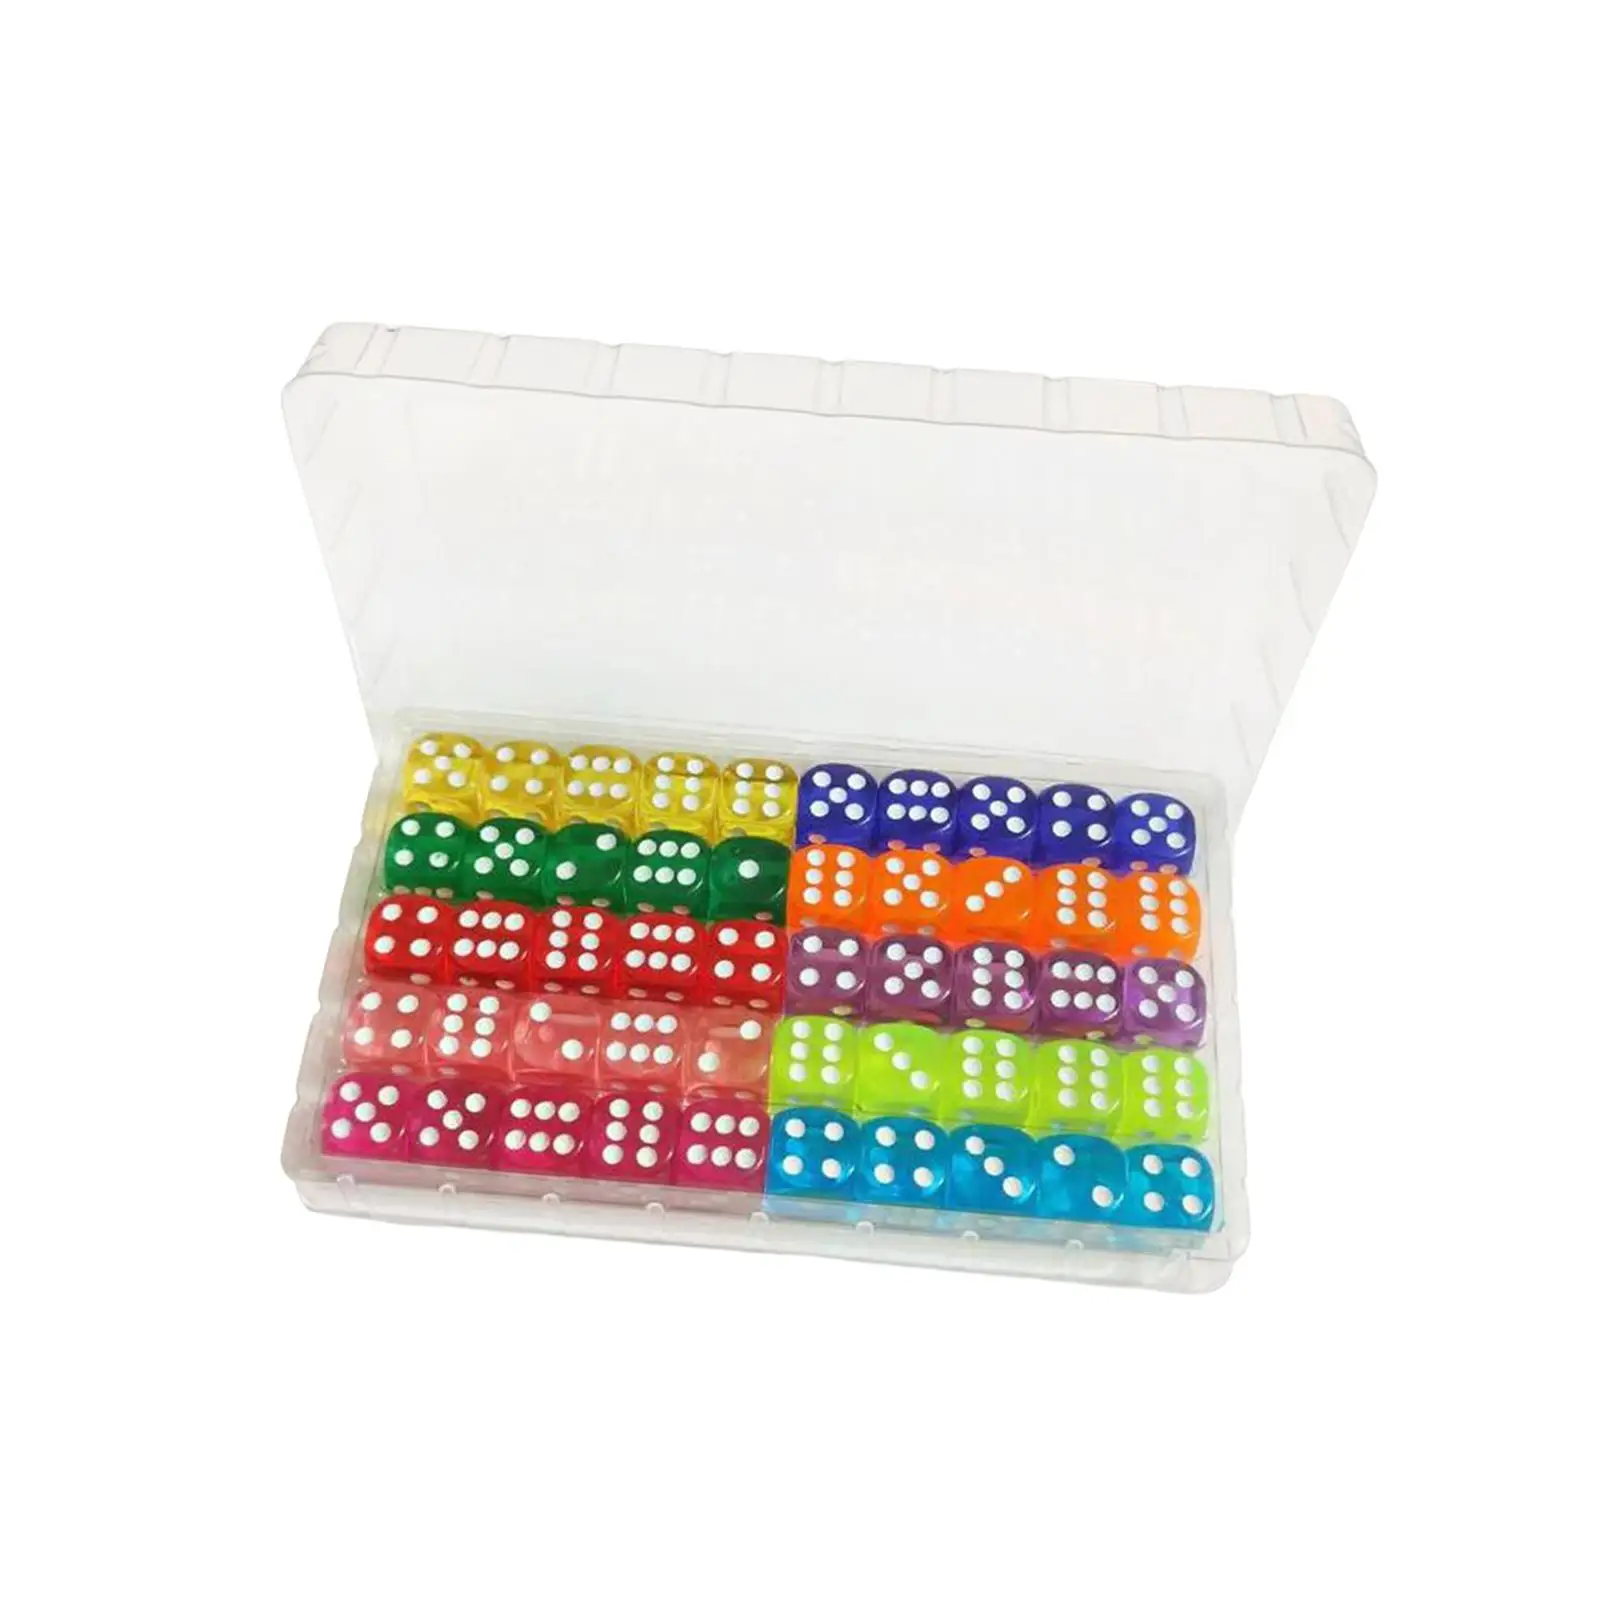 50 Pieces 6 Sided Dices Party Favors Game Dices Entertainment Toys for Board Game Translucent Colors Dices